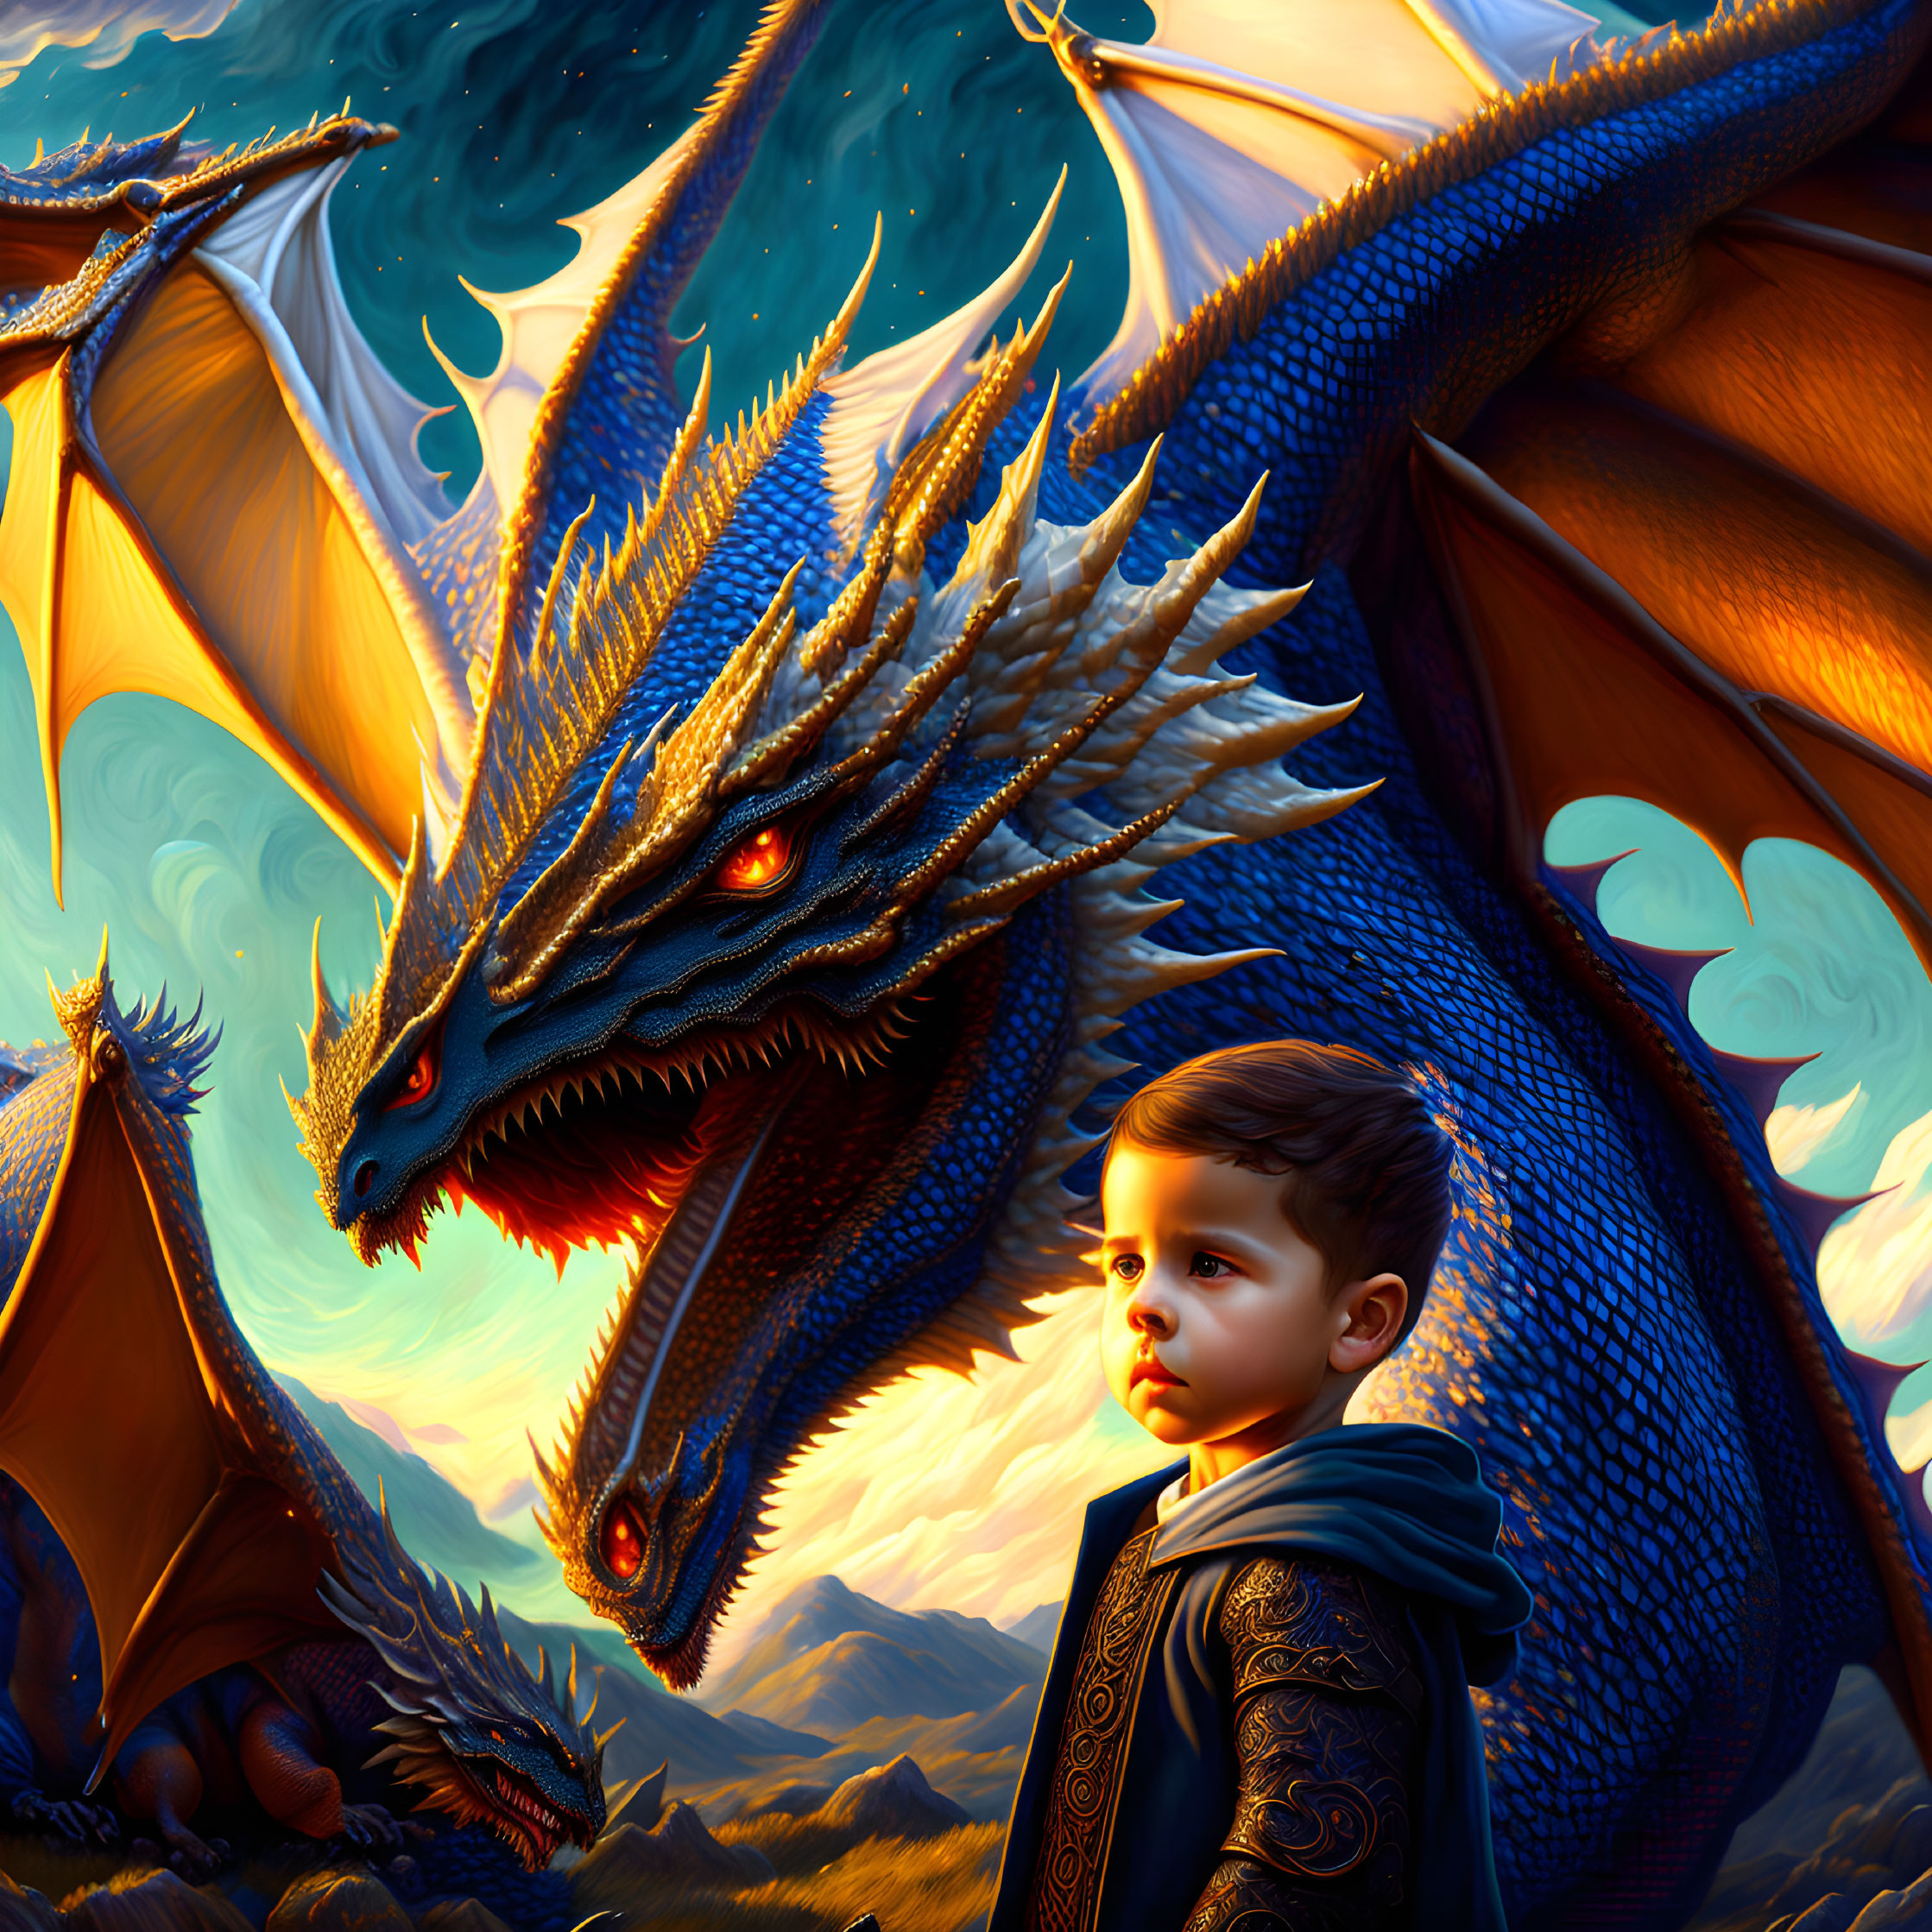 Young boy surrounded by majestic dragons at sunset